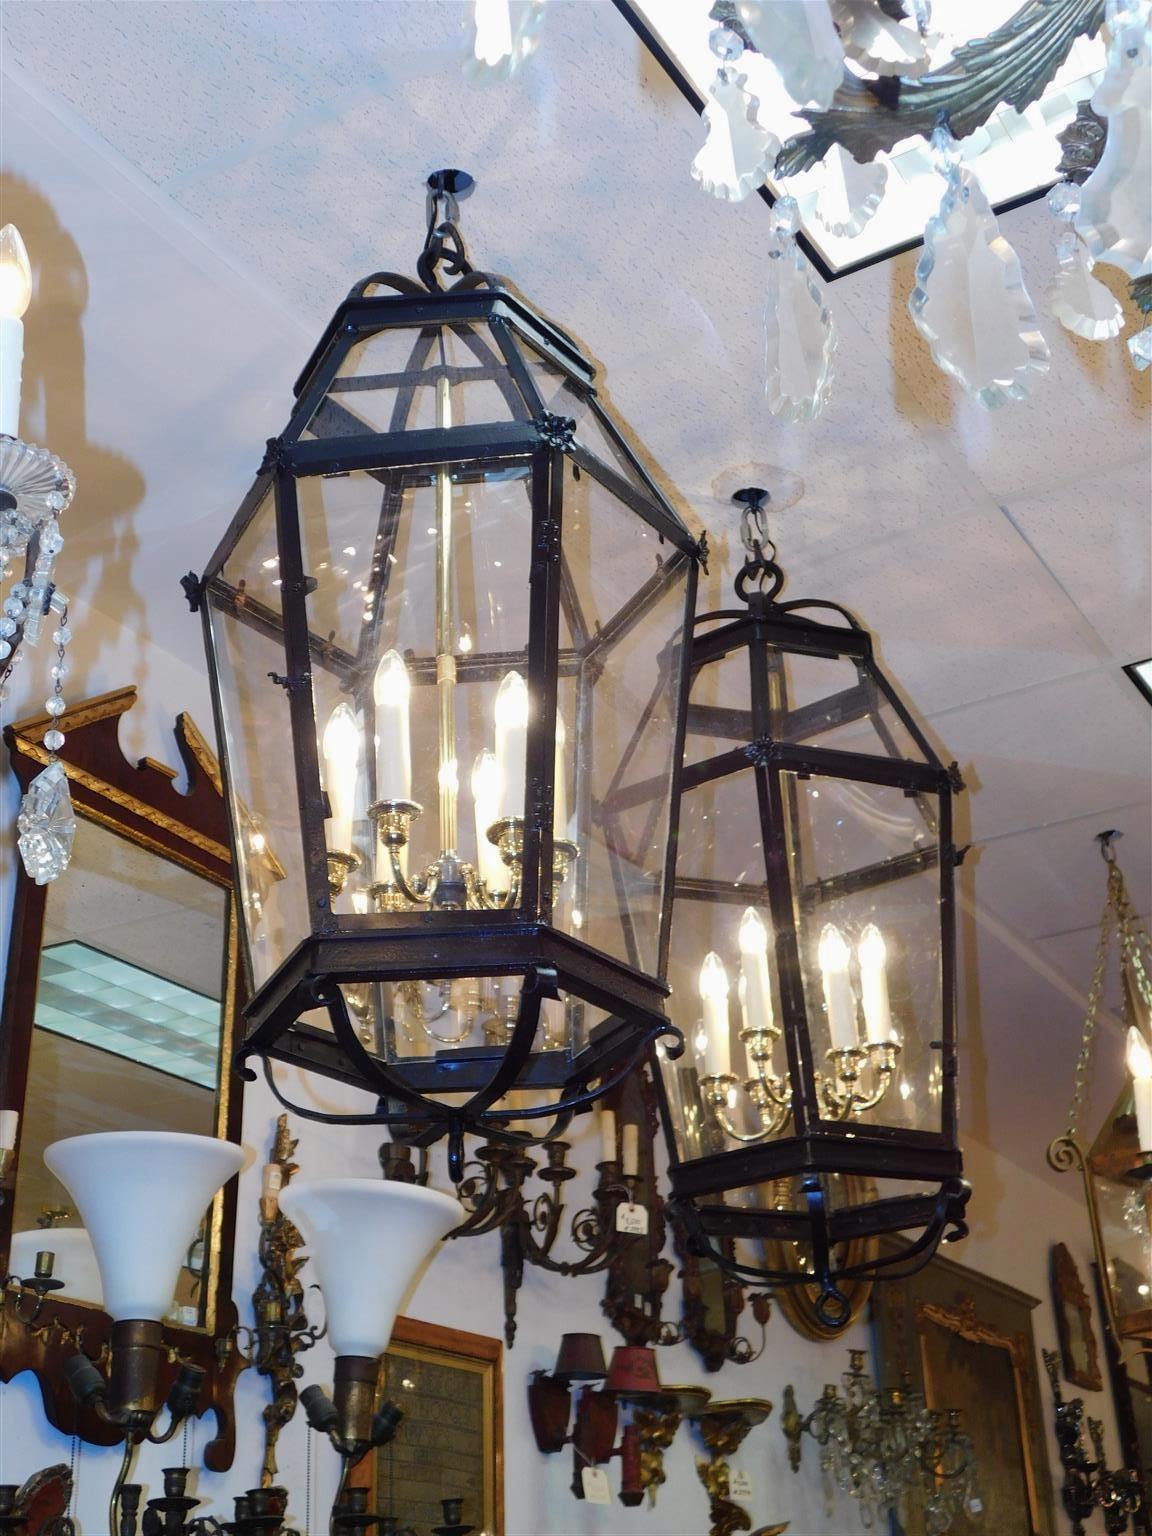 Pair of American wrought iron and brass dome shaped hanging lanterns with decorative floral corner medallions, scroll work, and circular ring finials. Early 19th Century. Pair were originally candle powered and have been electrified with a six light